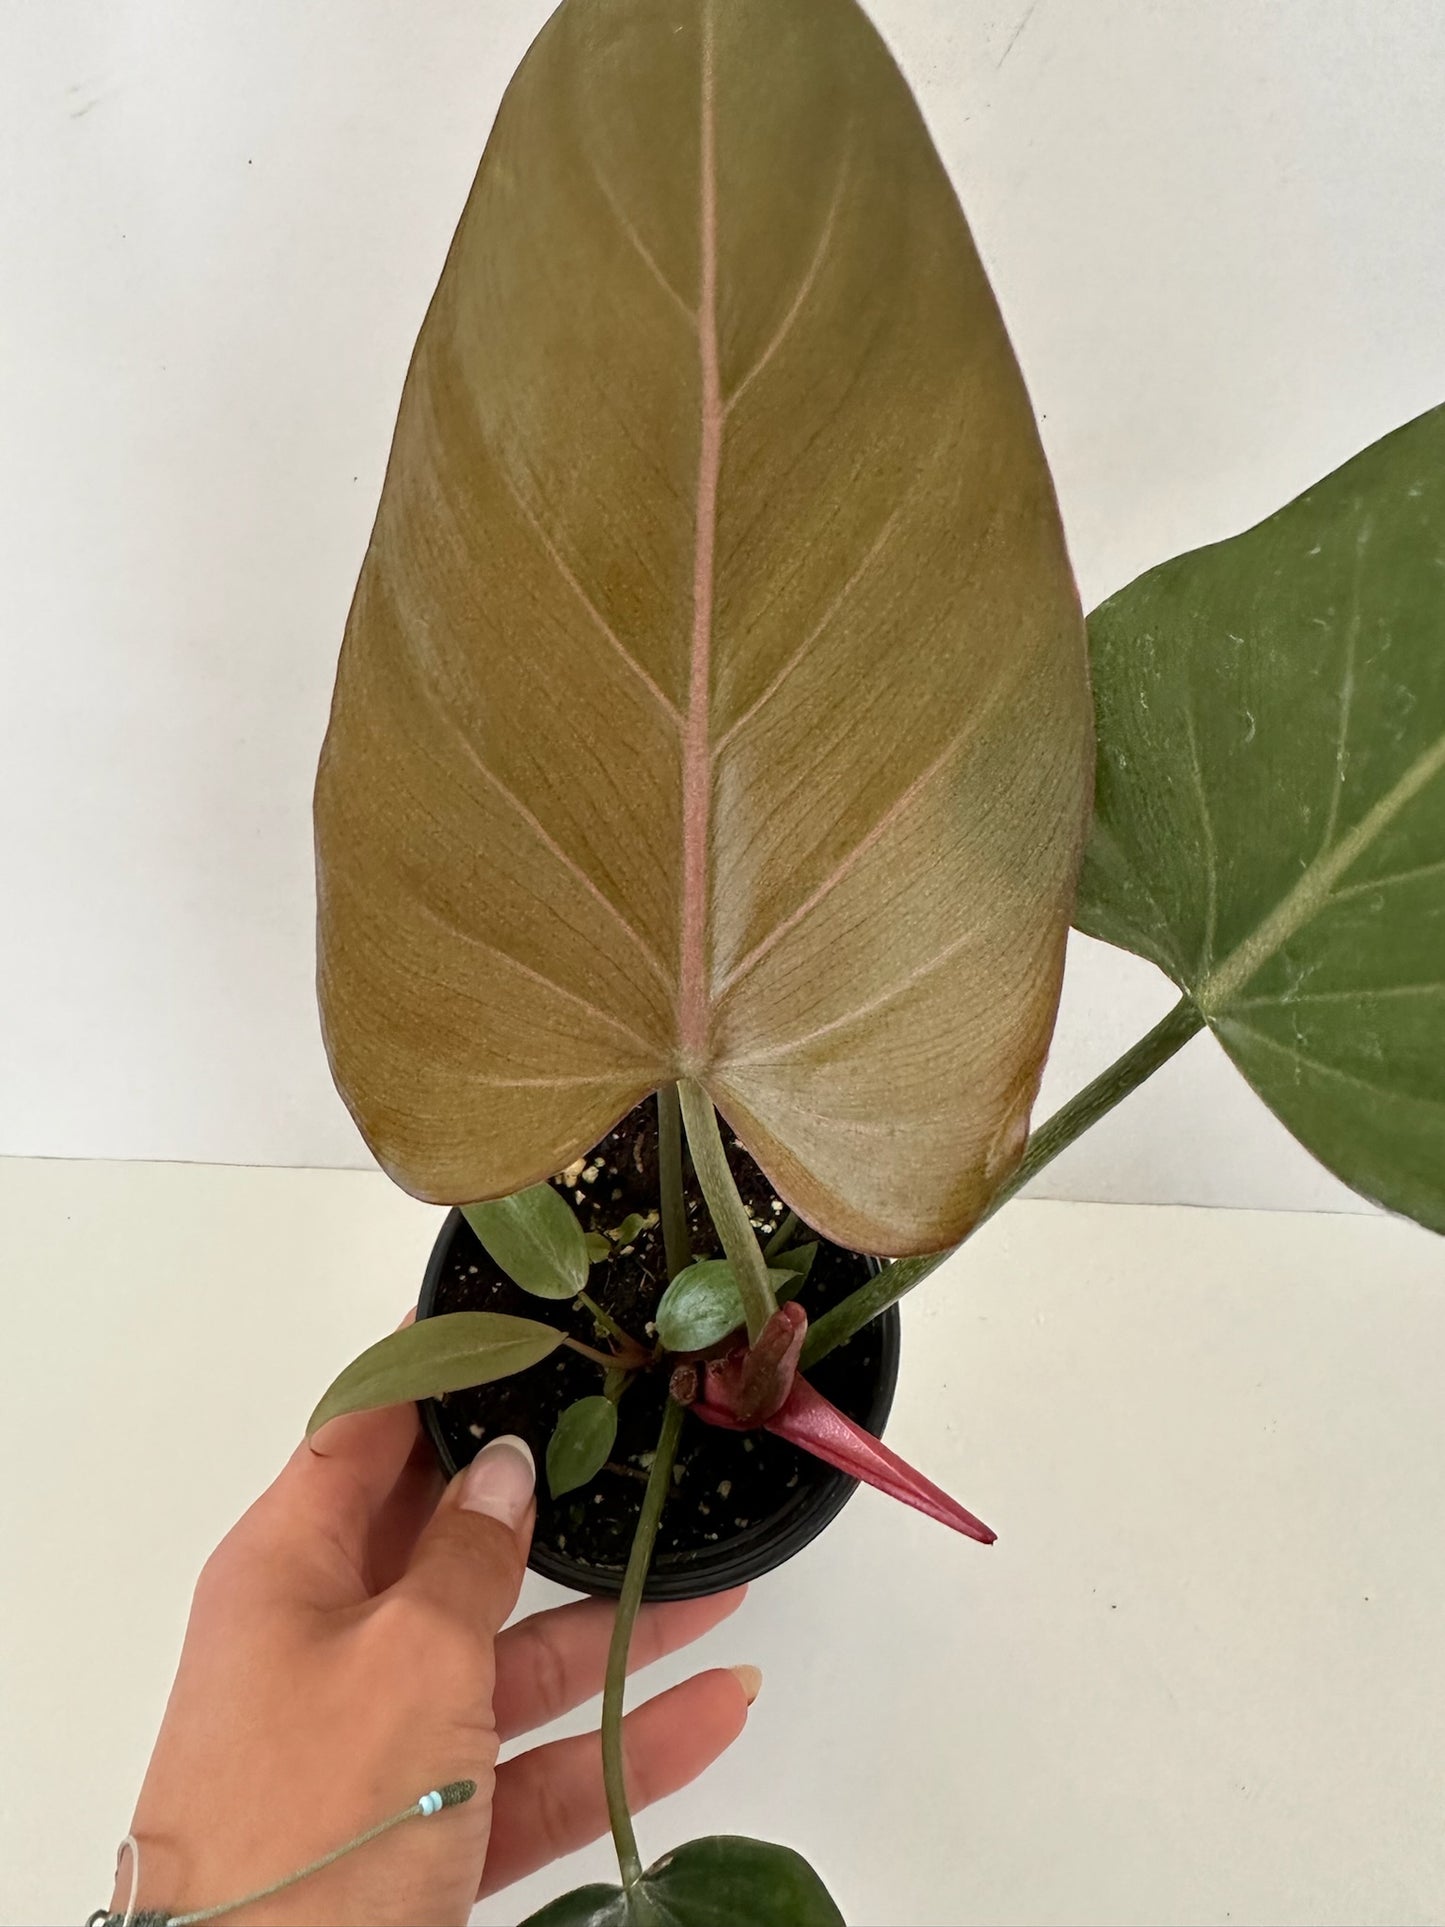 Philodendron 'Summer Glory'  - Gloriosum x McColleys Red Hybrid - Tropical Houseplant